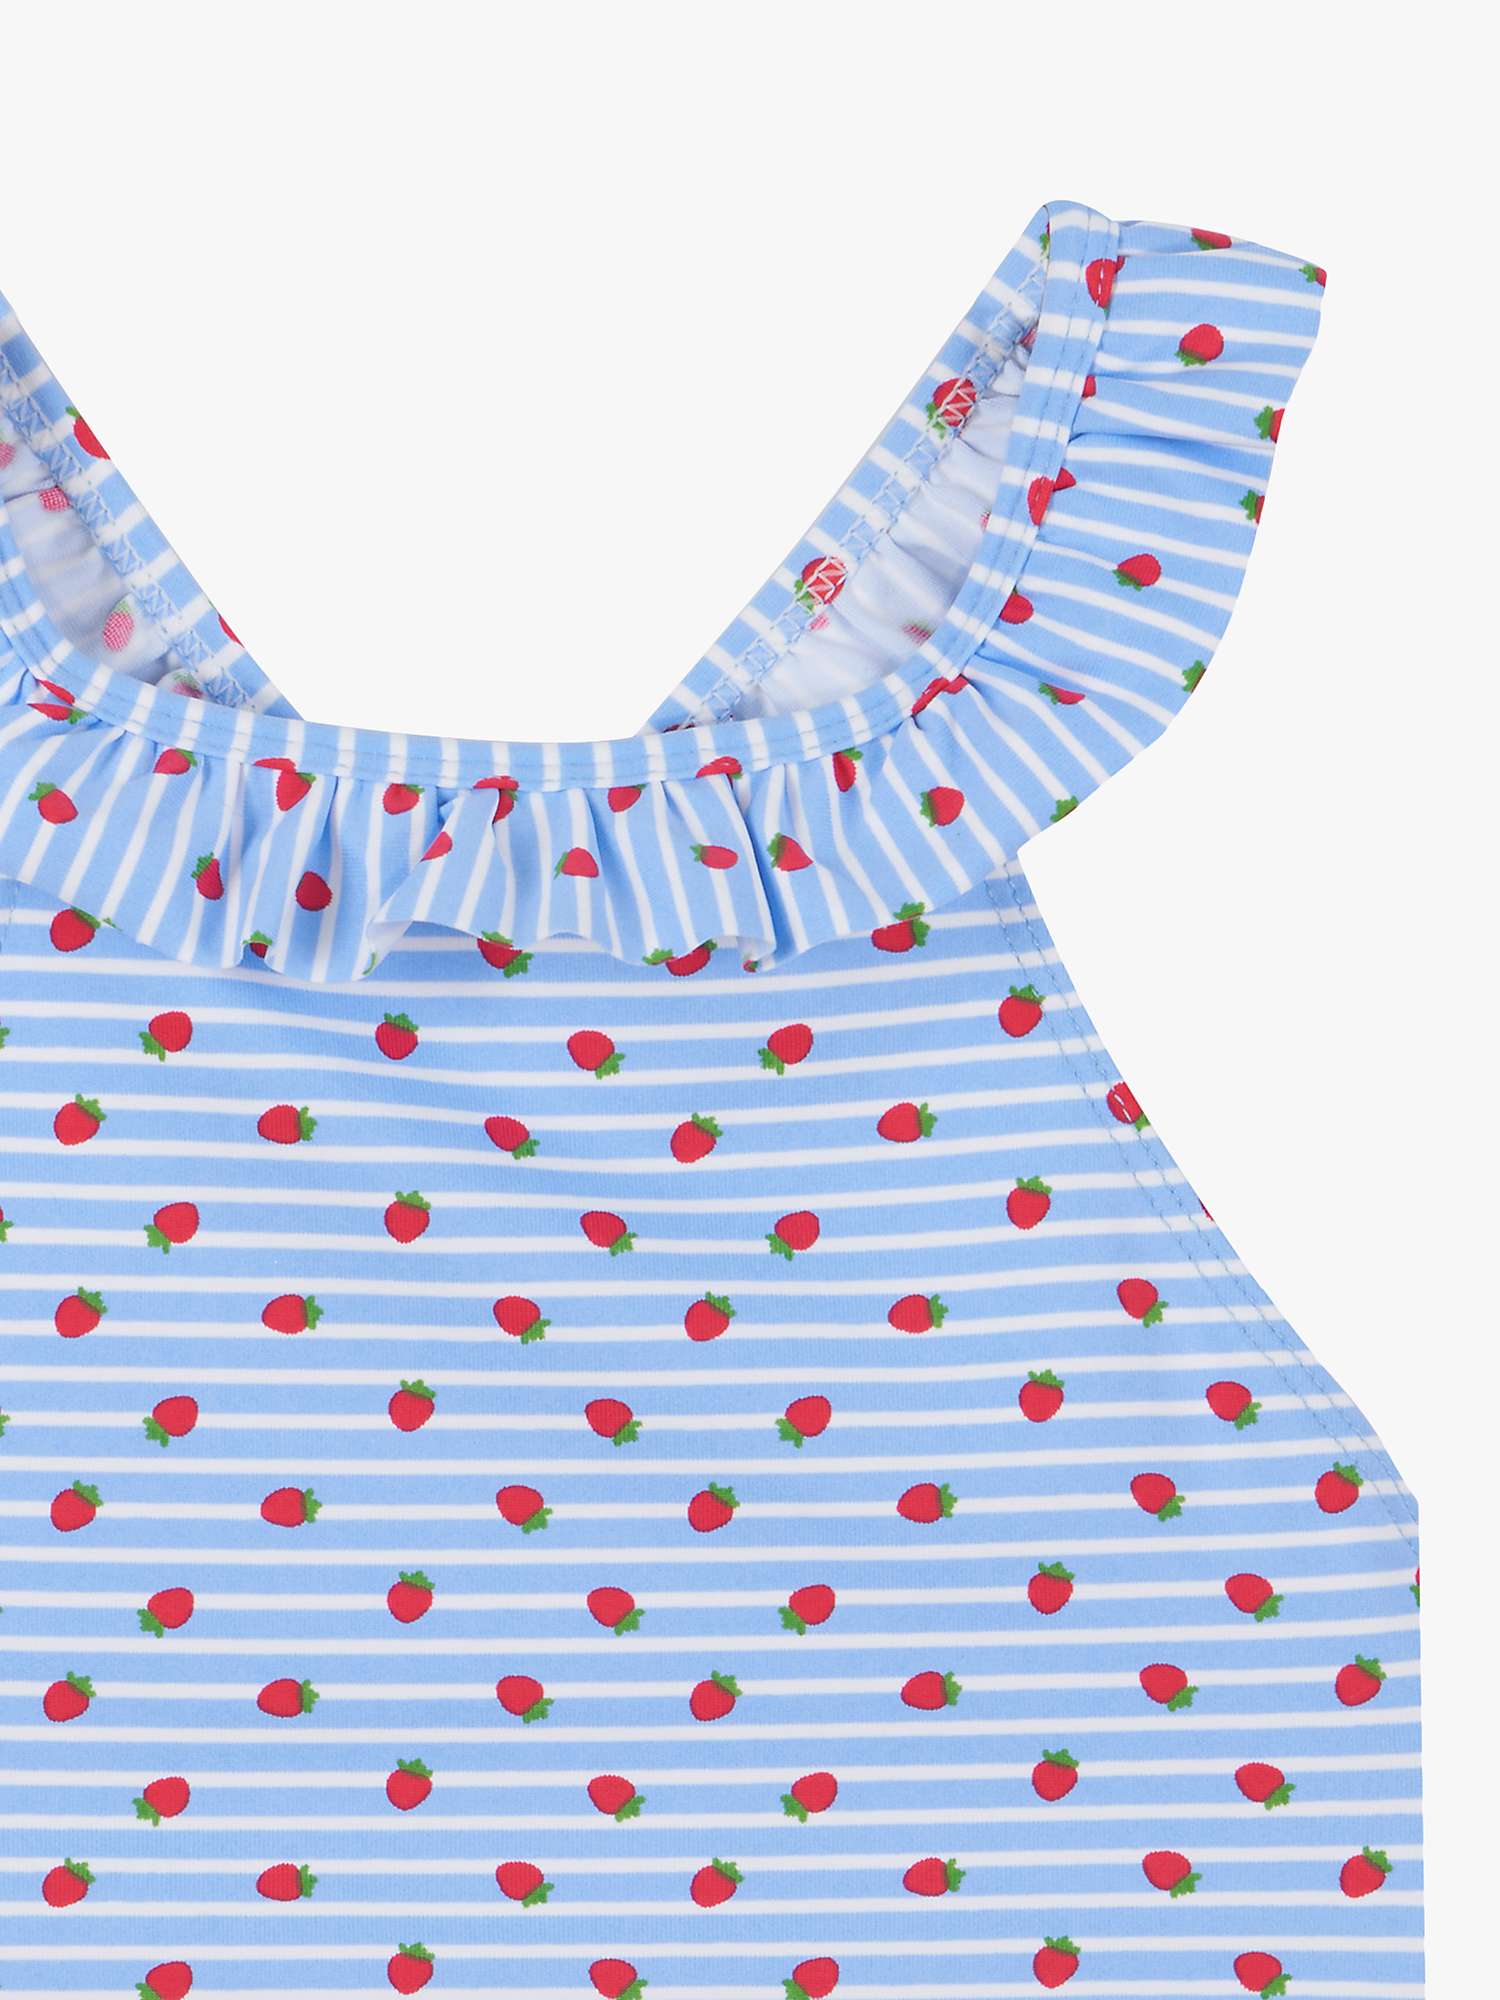 Buy Trotters Baby Strawberry Peplum Swimsuit, Blue S/Strawberry Online at johnlewis.com